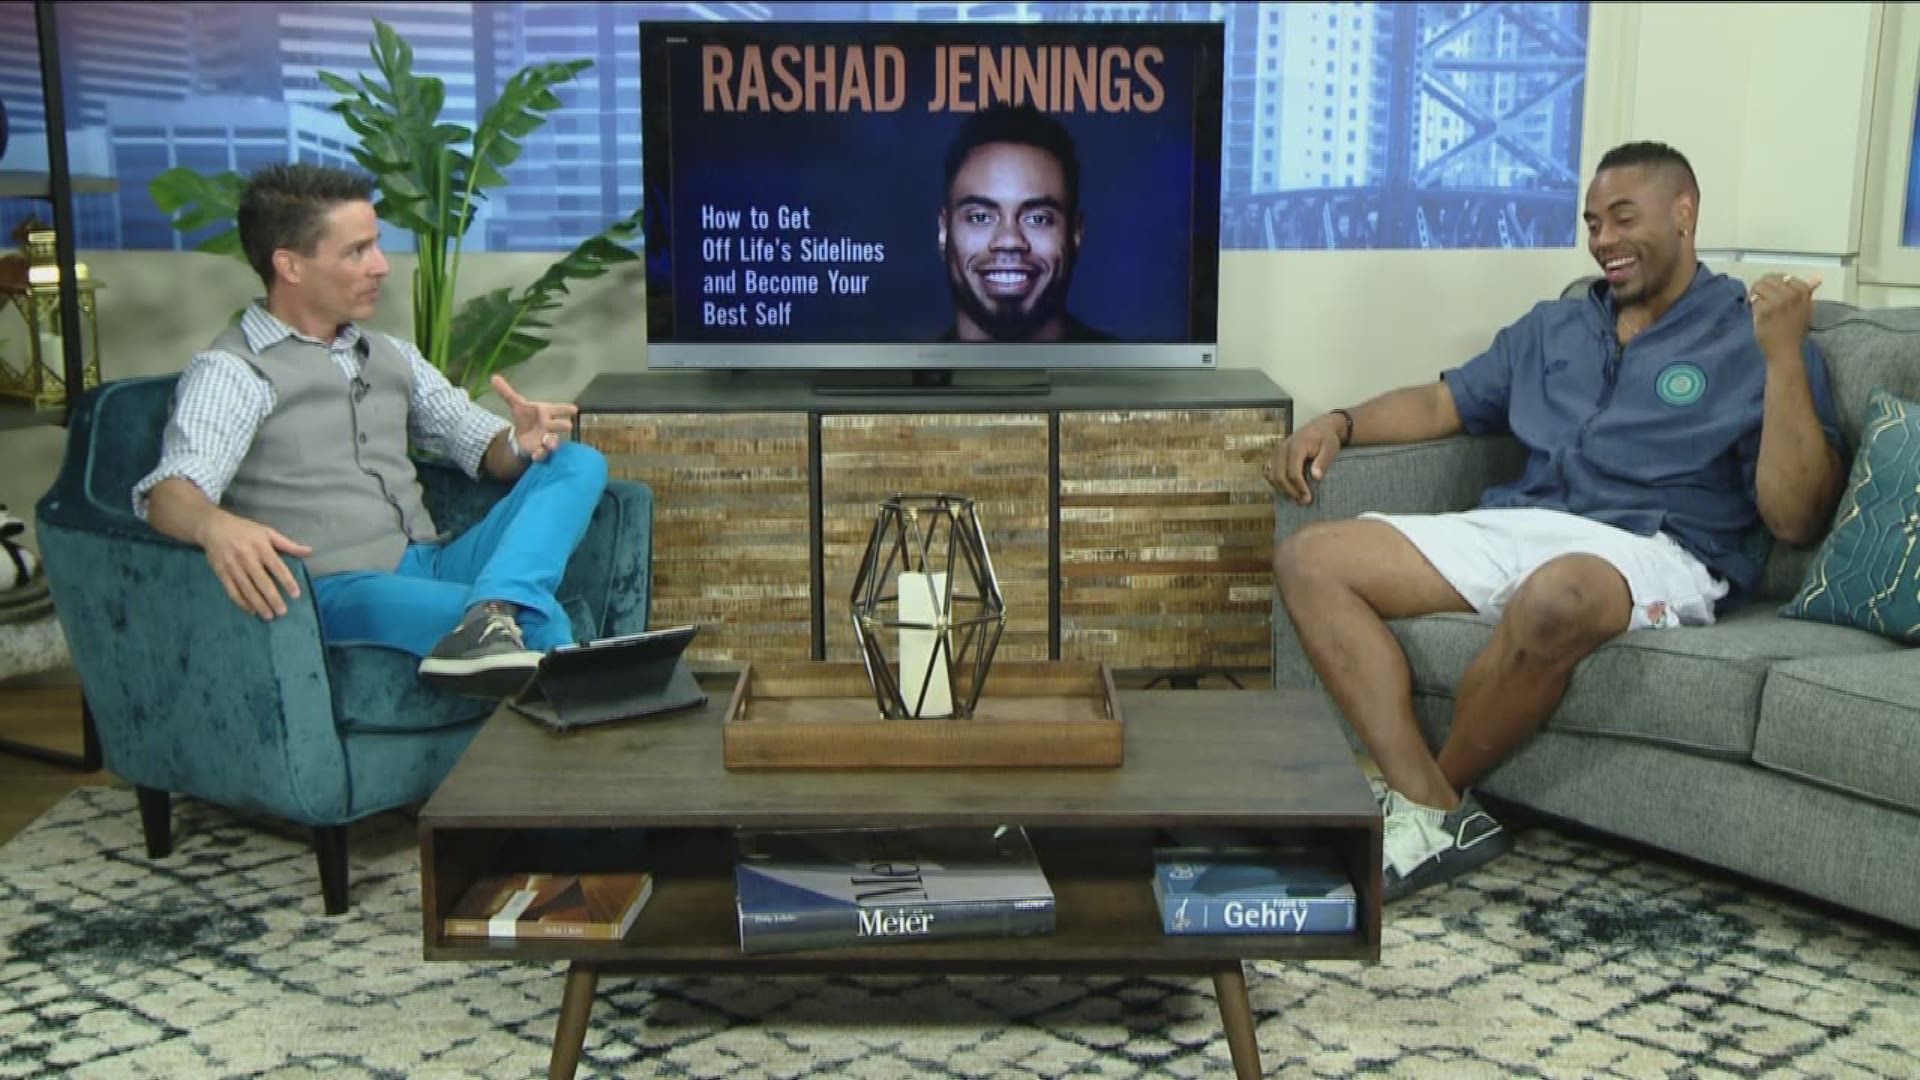 Hear about Rashad Jennings' New York Times Best Seller book!